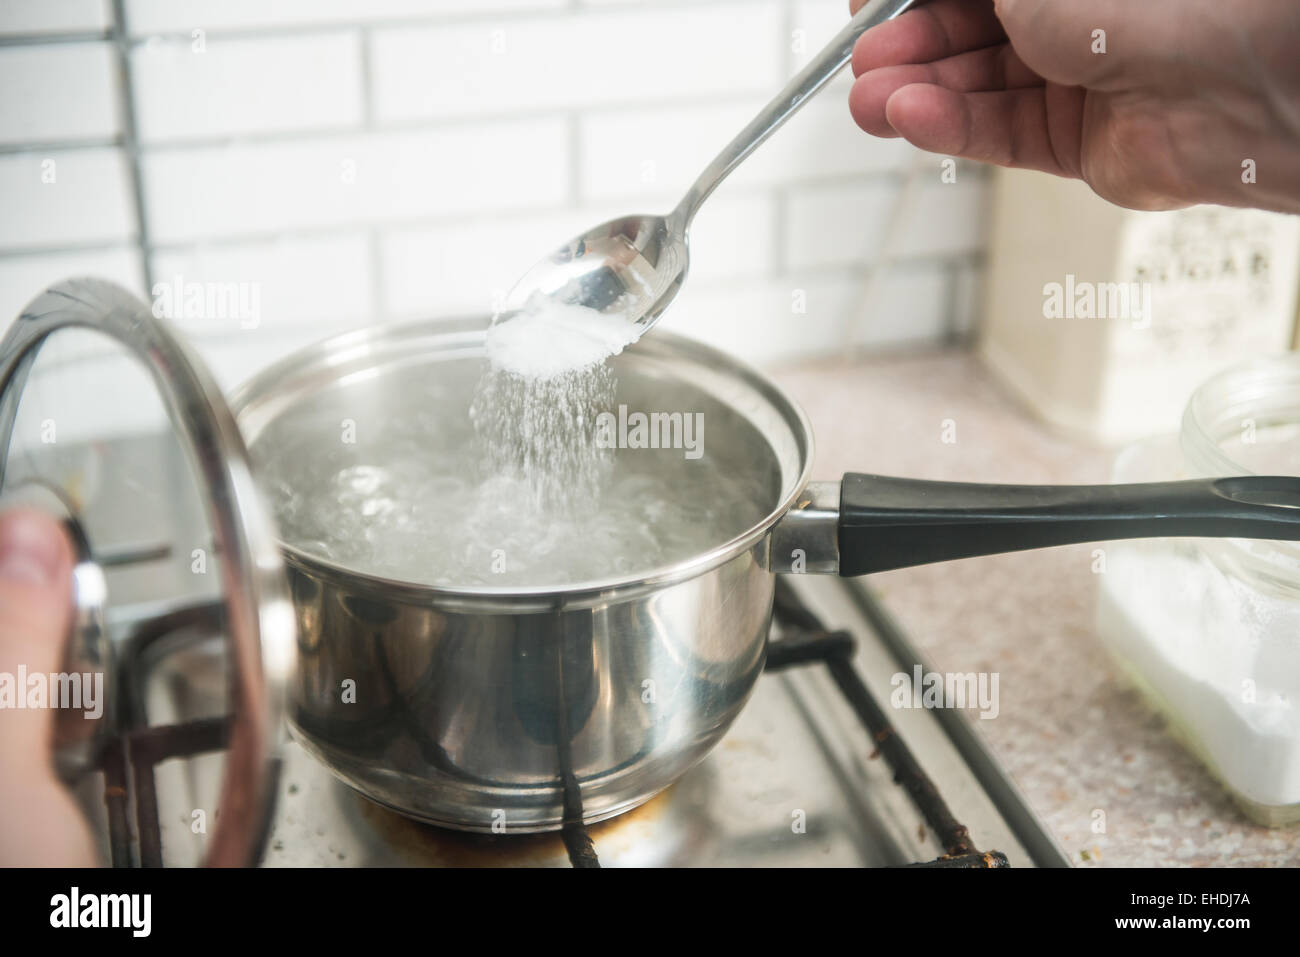 Pot Boiling Water Electric Stove Kitchen Space Text Stock Photo by  ©NewAfrica 240604464